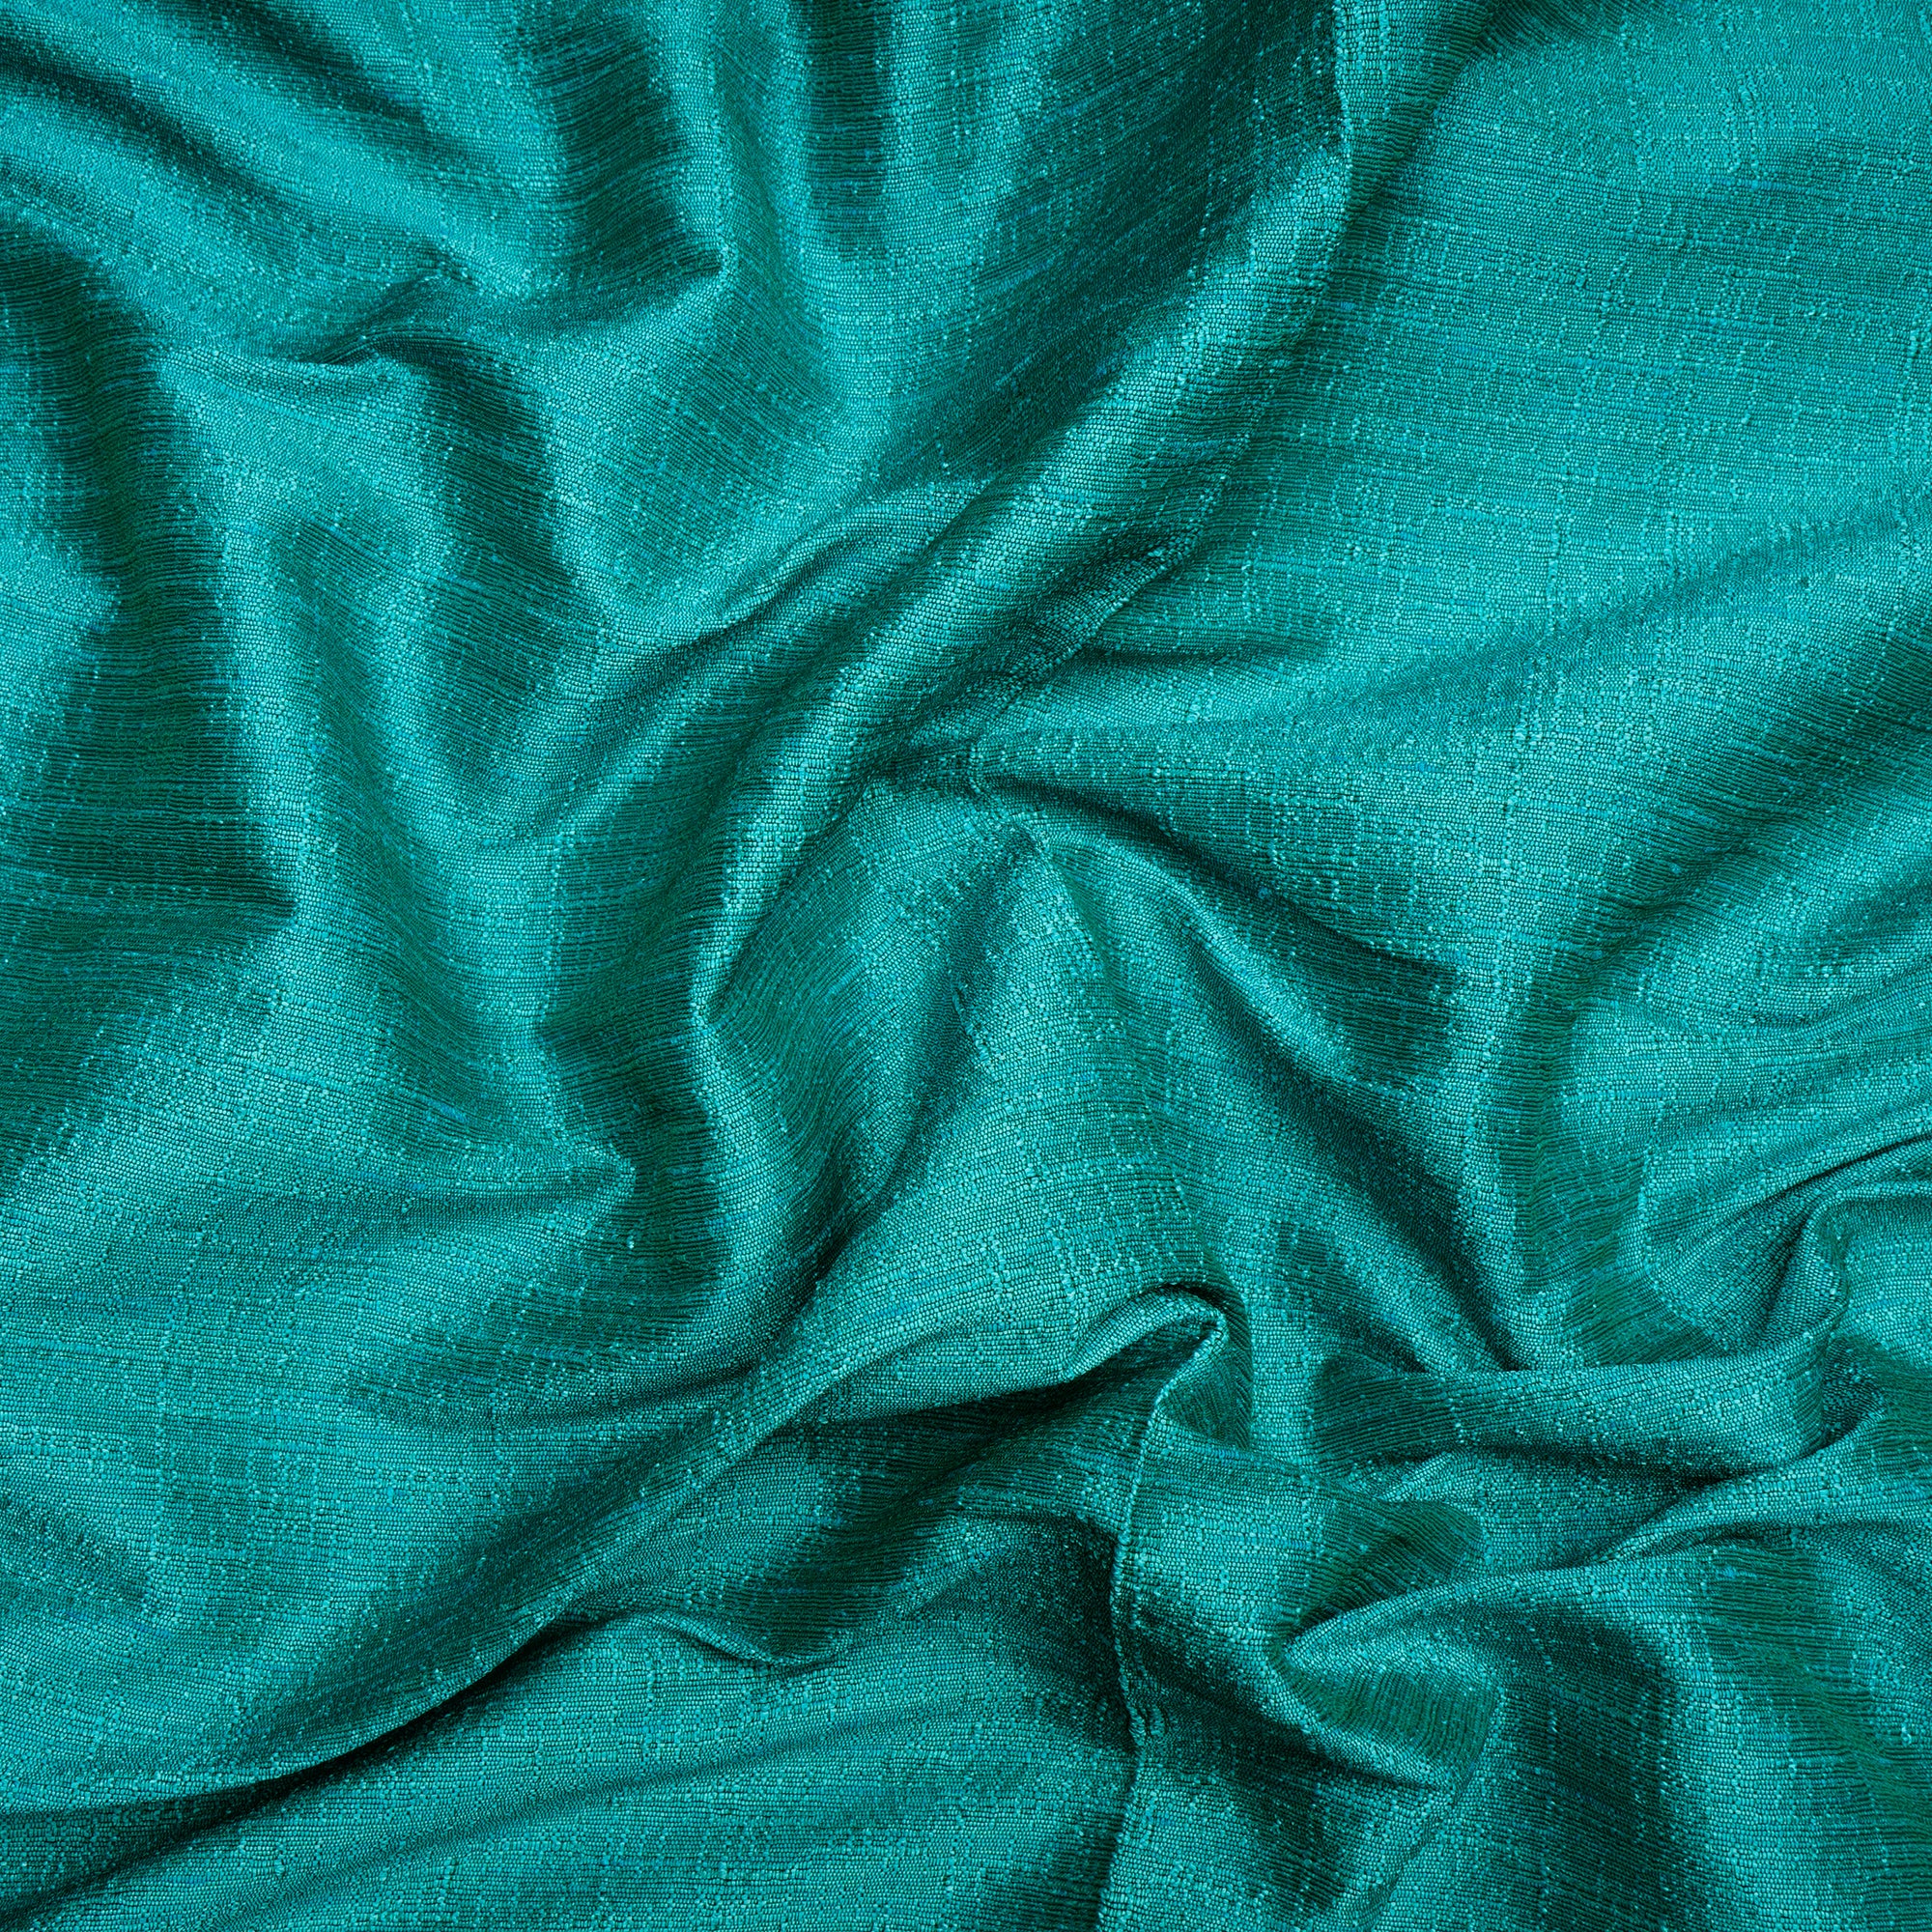 Medium Turquoise Color Polyester Dupion Fabric